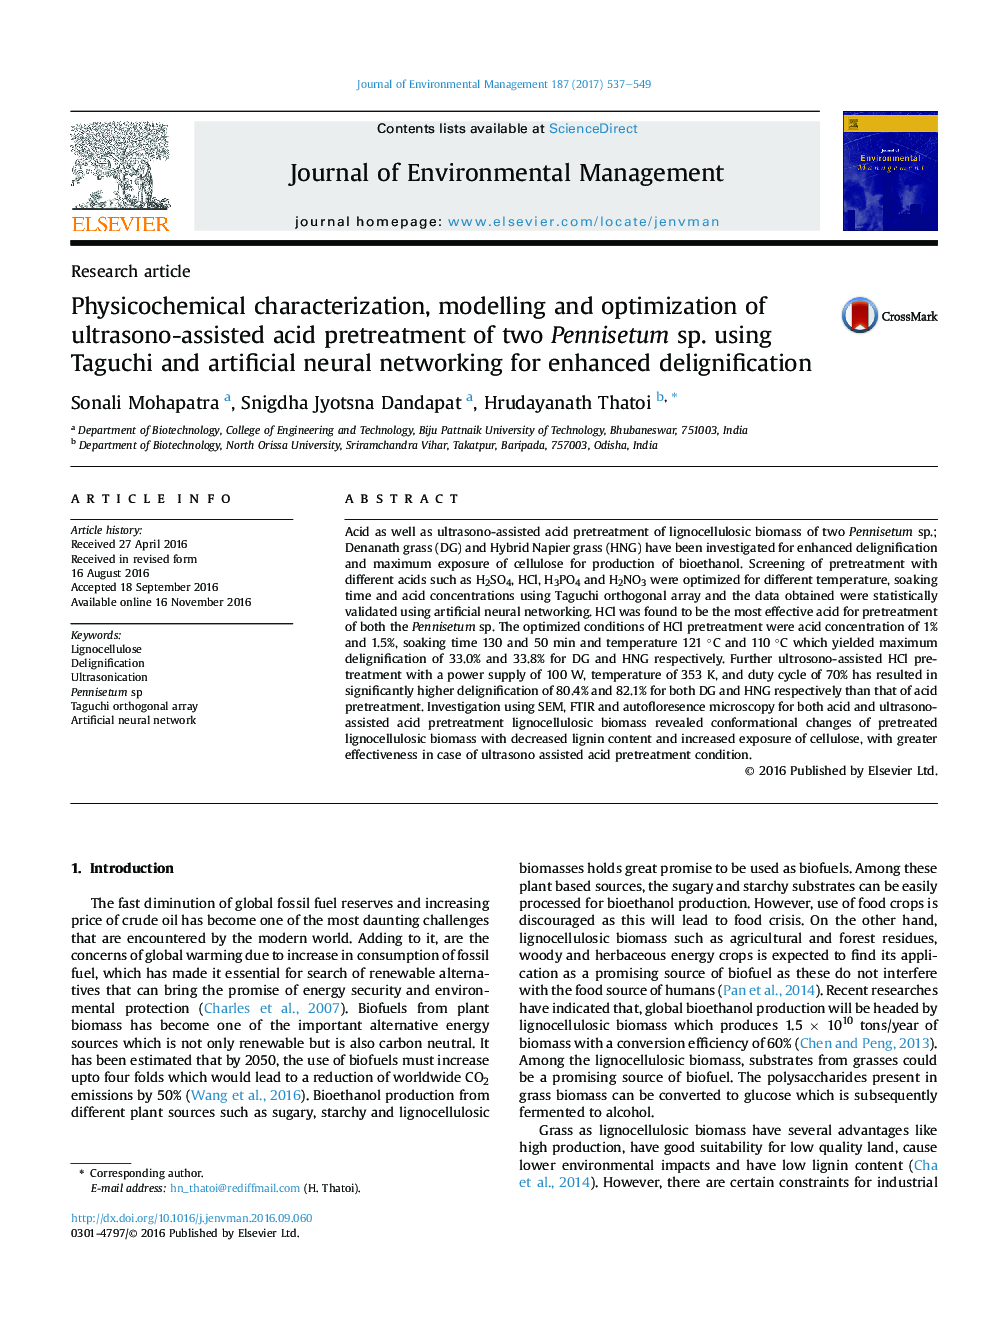 Research articlePhysicochemical characterization, modelling and optimization of ultrasono-assisted acid pretreatment of two Pennisetum sp. using Taguchi and artificial neural networking for enhanced delignification